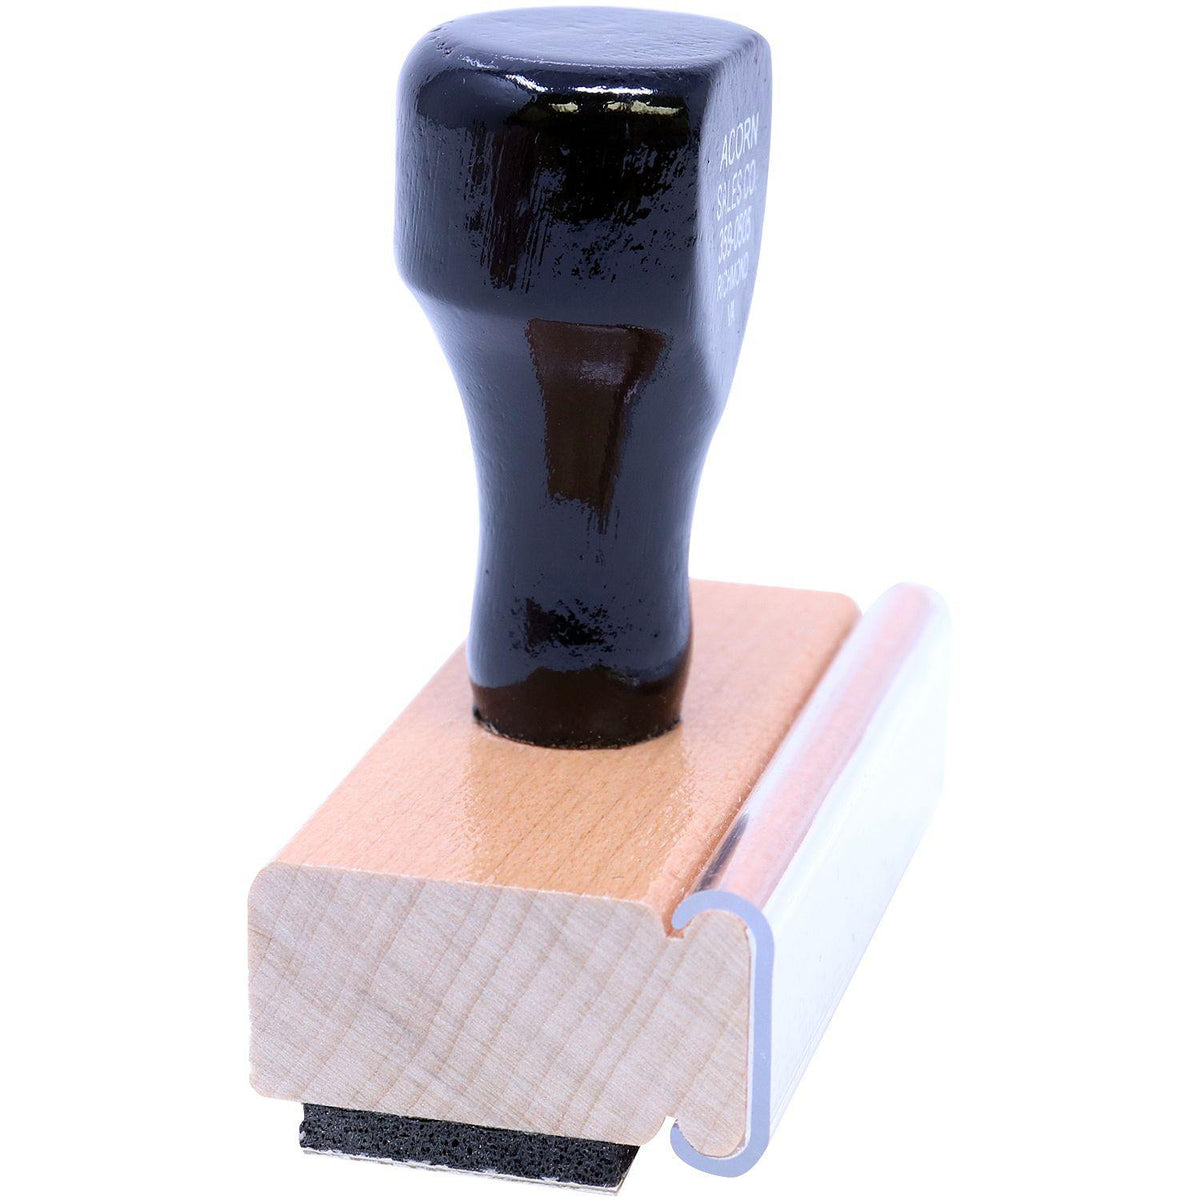 Narrow Posted Rubber Stamp - Engineer Seal Stamps - Brand_Acorn, Impression Size_Small, Stamp Type_Regular Stamp, Type of Use_Office